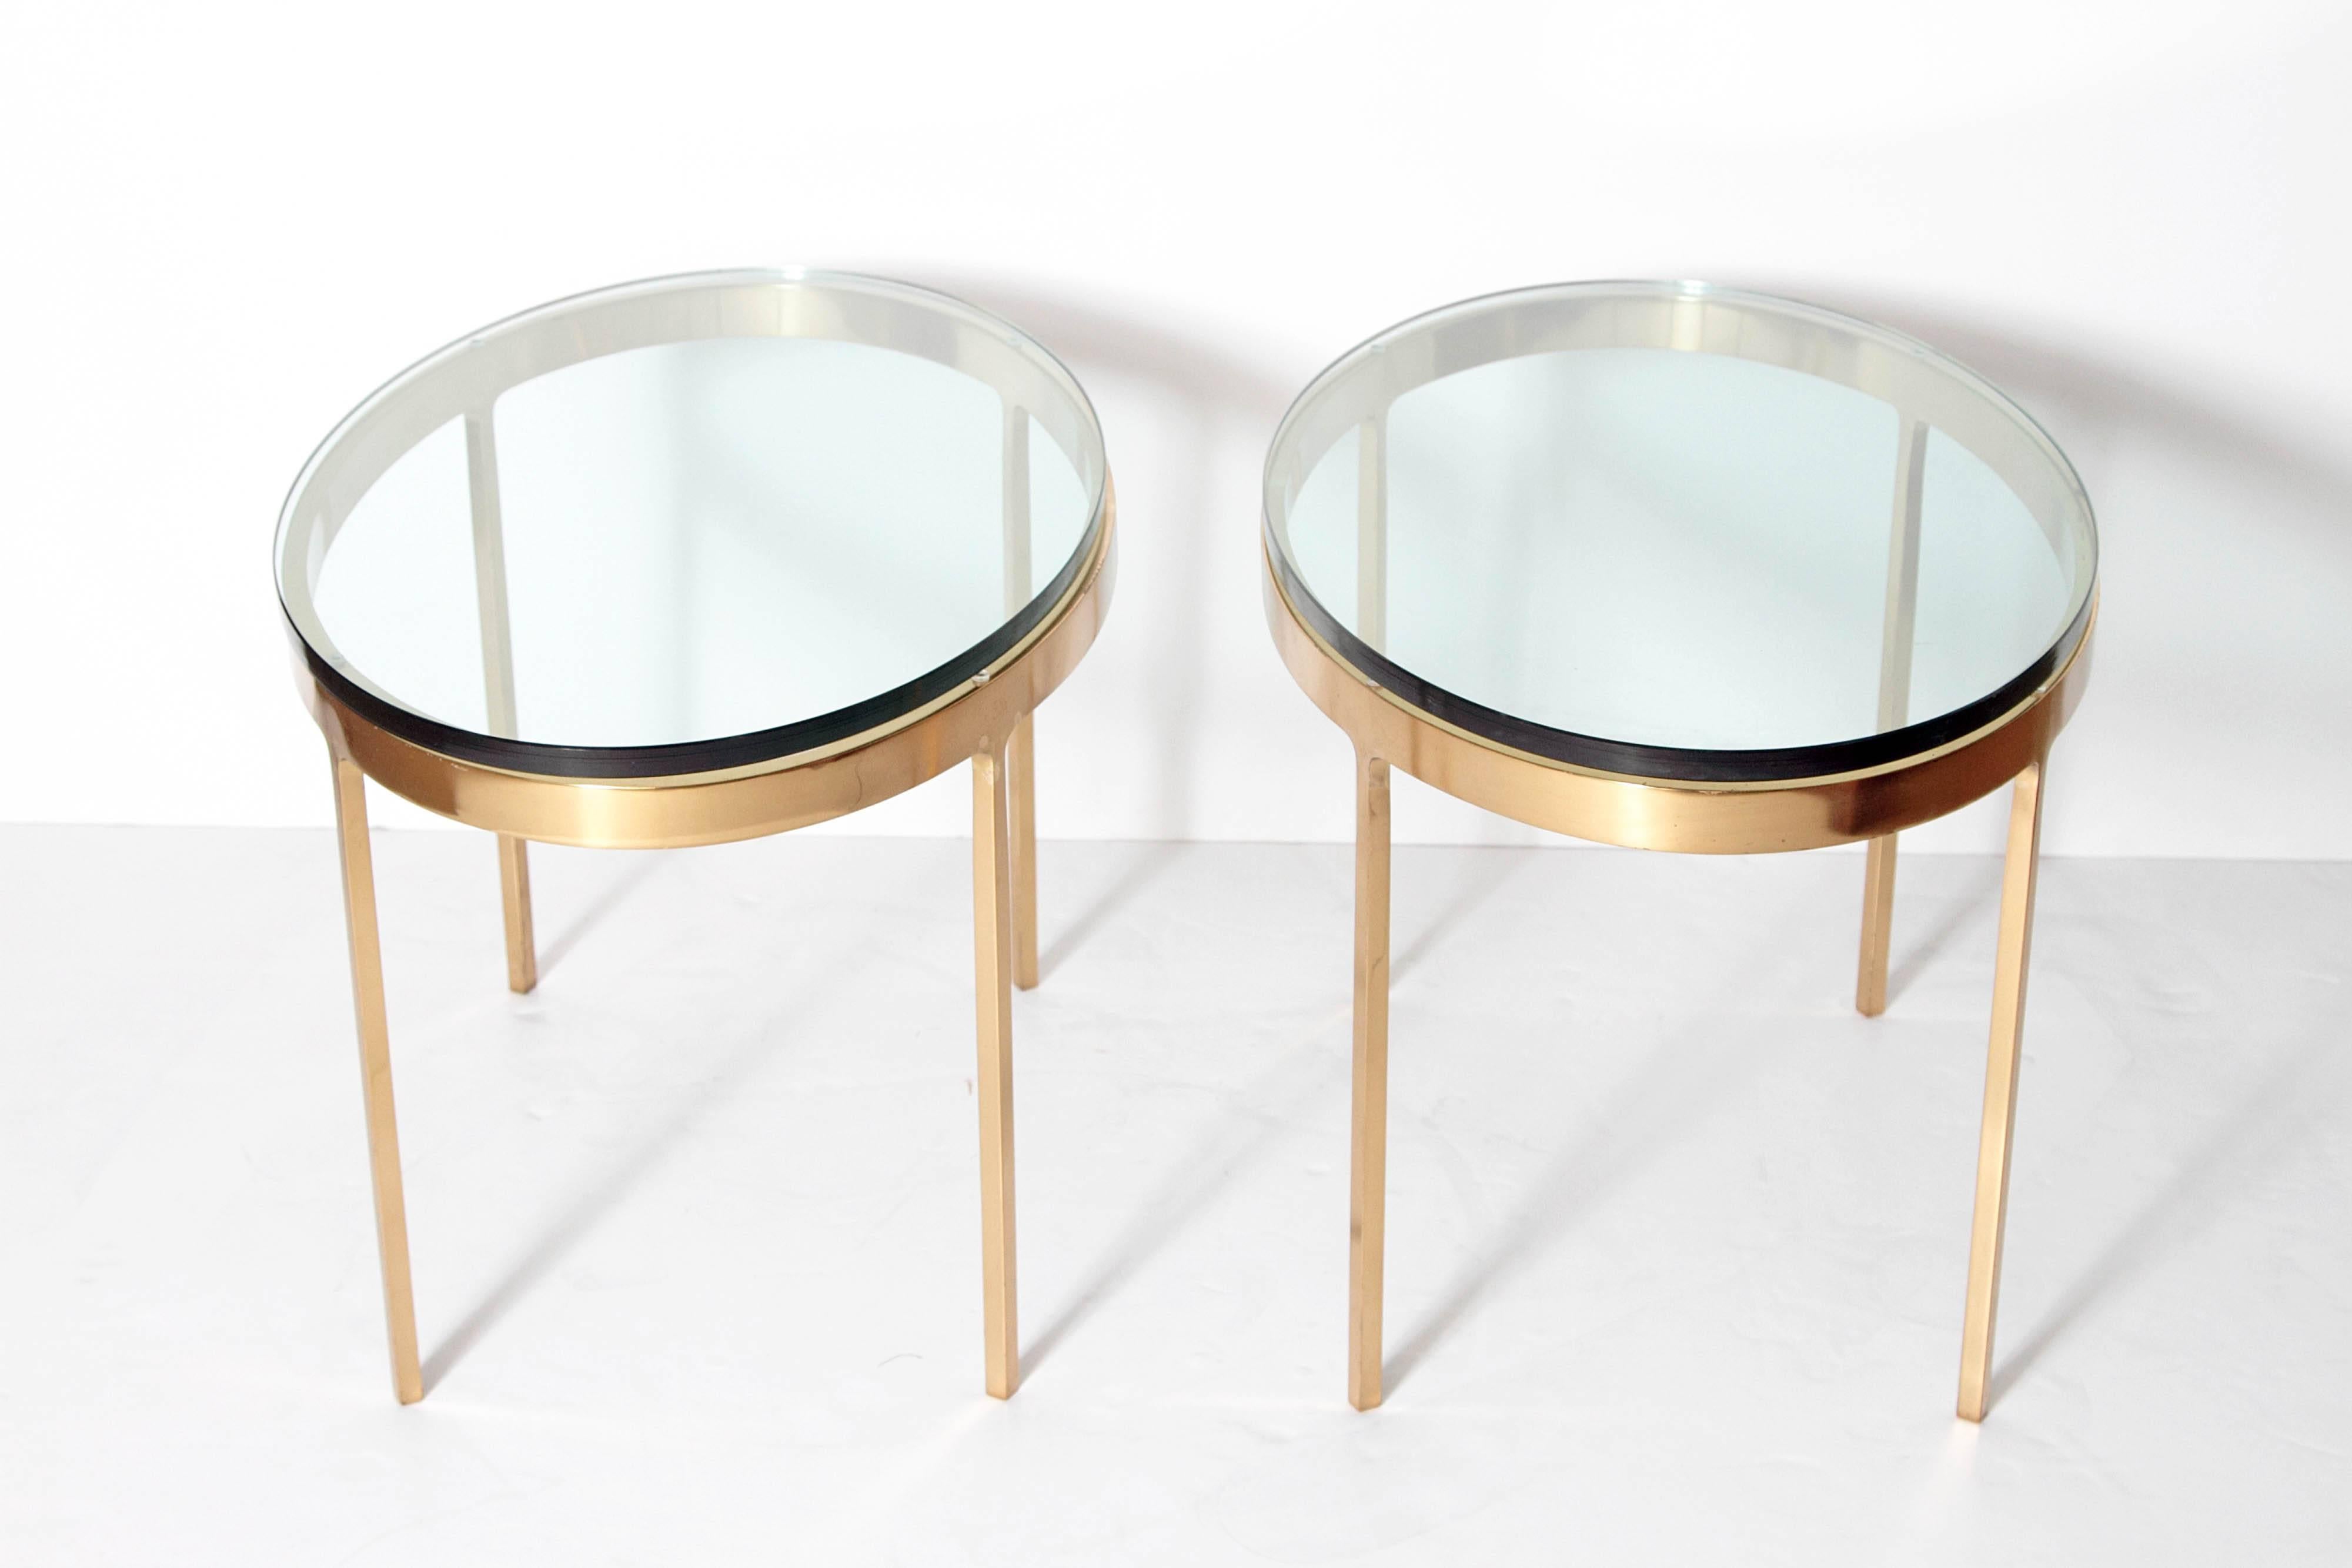 20th Century Oval Brass and Glass Tables by Nicos Zographos